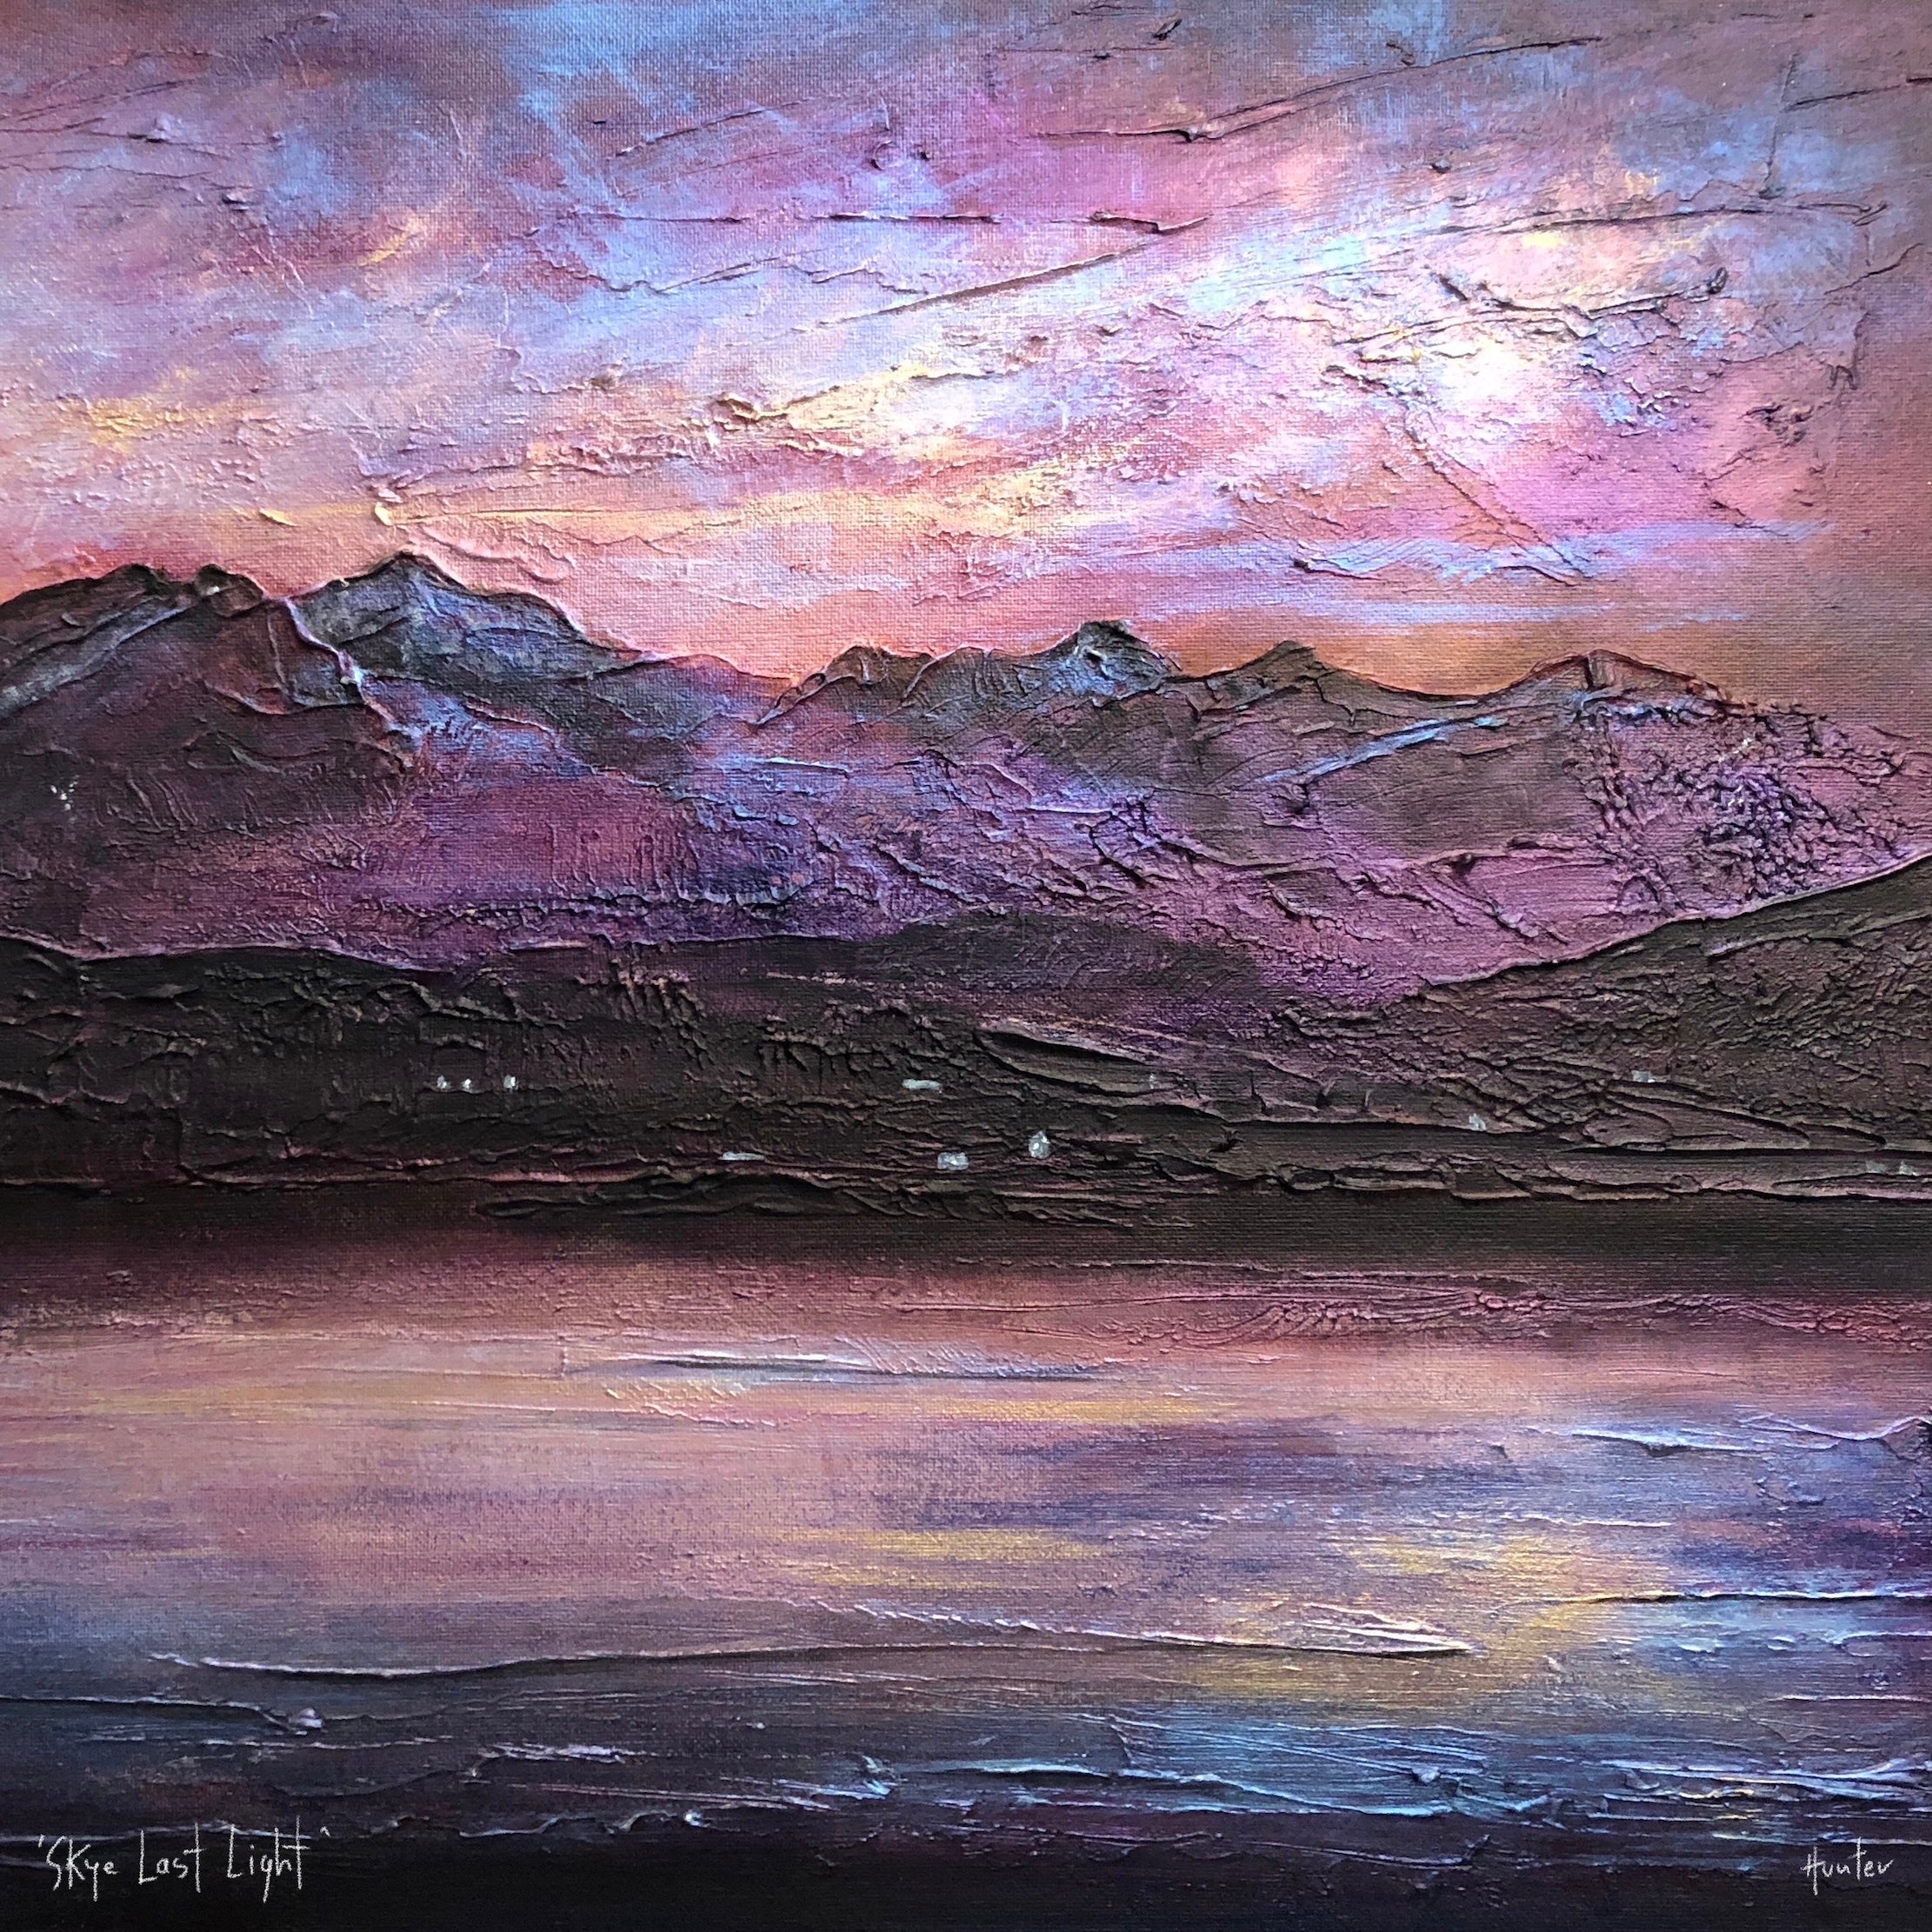 Last Skye Light | Scotland In Your Pocket Art Print-Scotland In Your Pocket Framed Prints-Skye Art Gallery-Paintings, Prints, Homeware, Art Gifts From Scotland By Scottish Artist Kevin Hunter